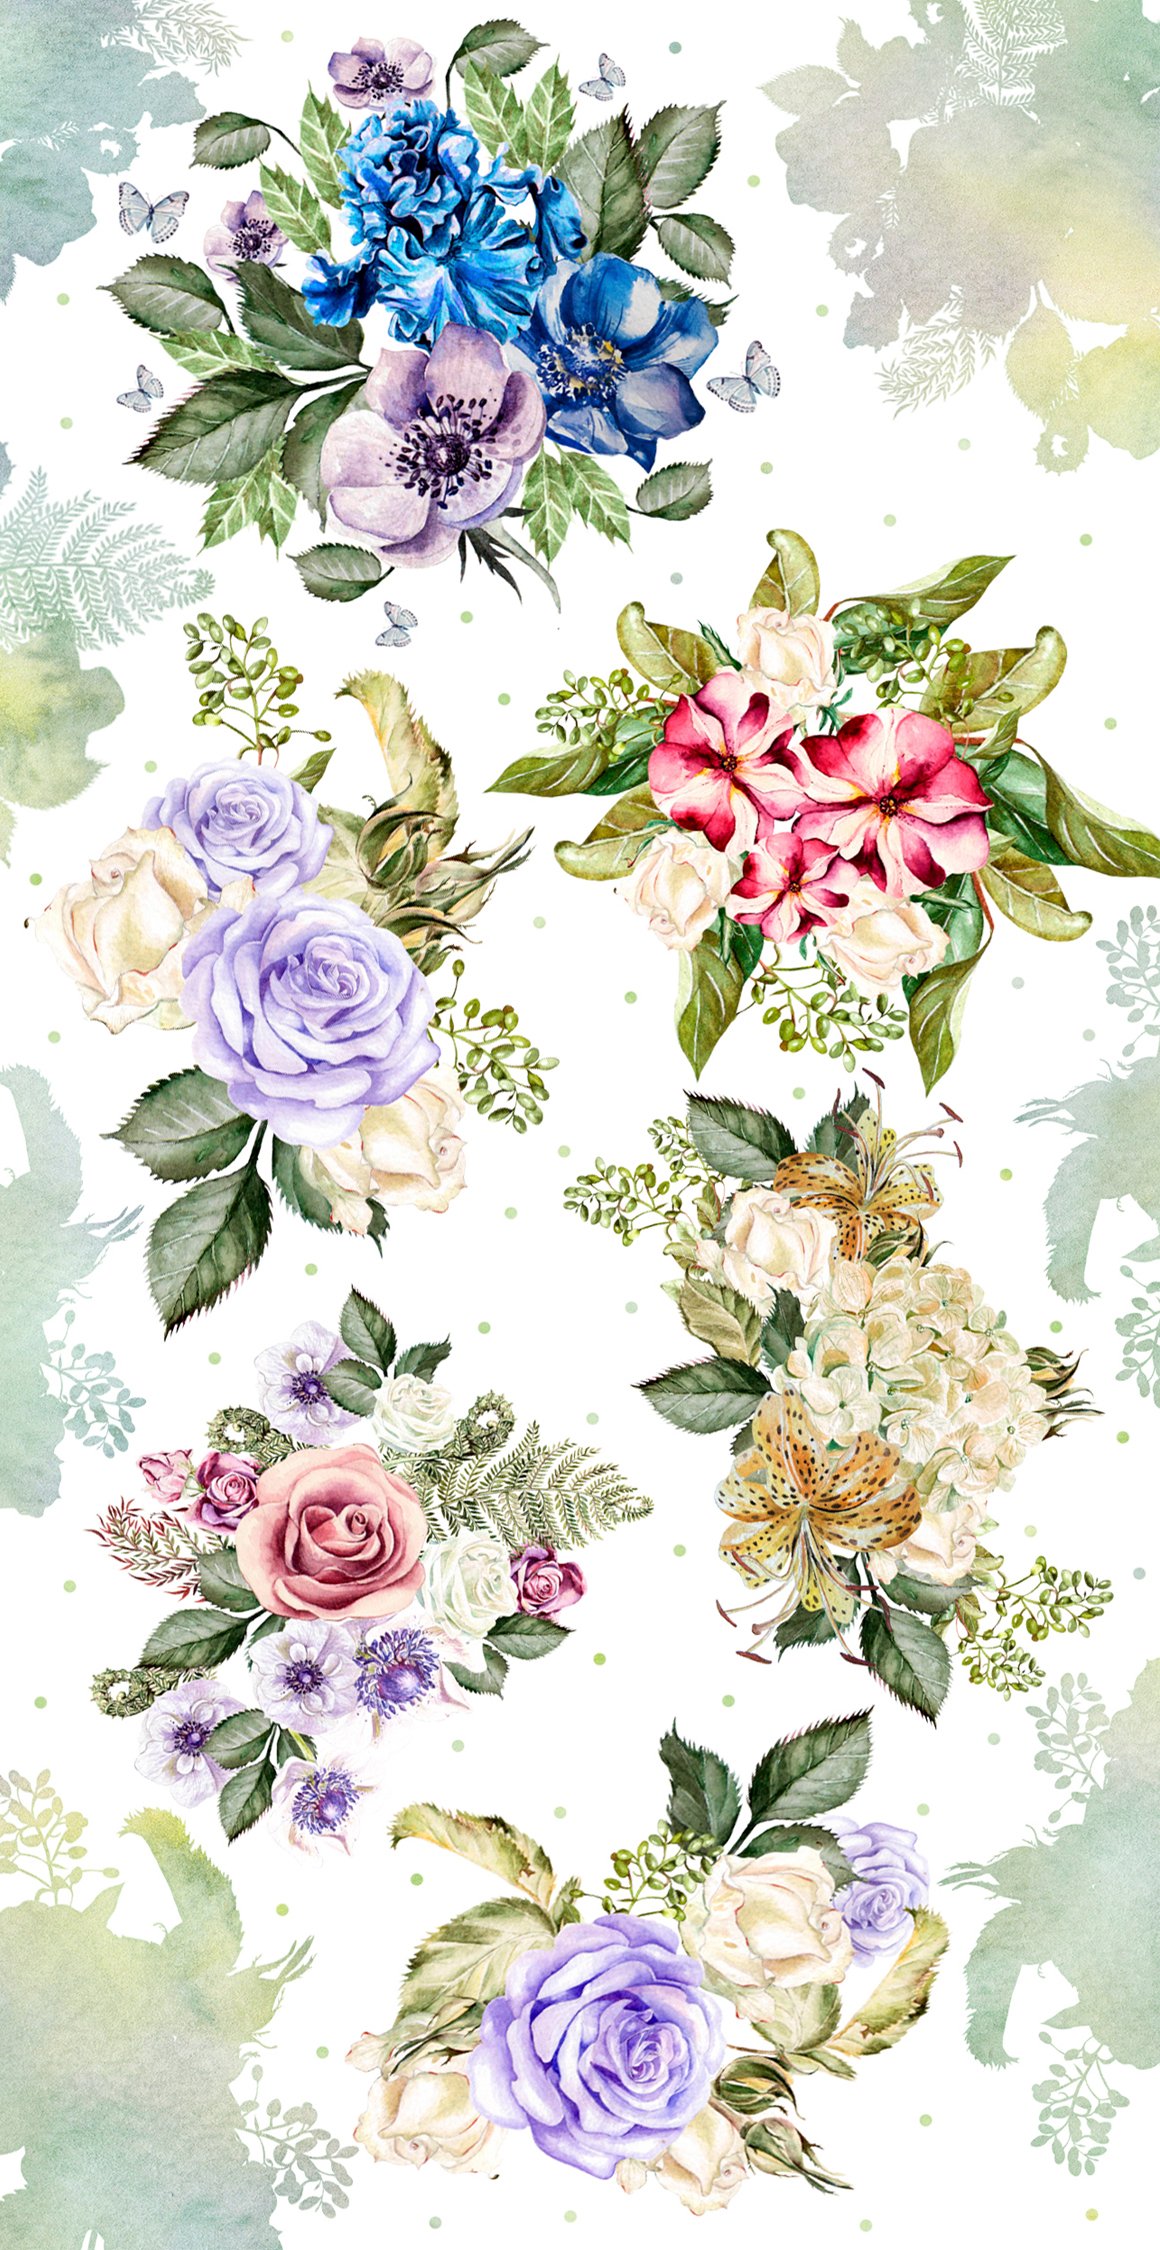 45 Hand Drawn Watercolor Bouquet & Wreath Pack